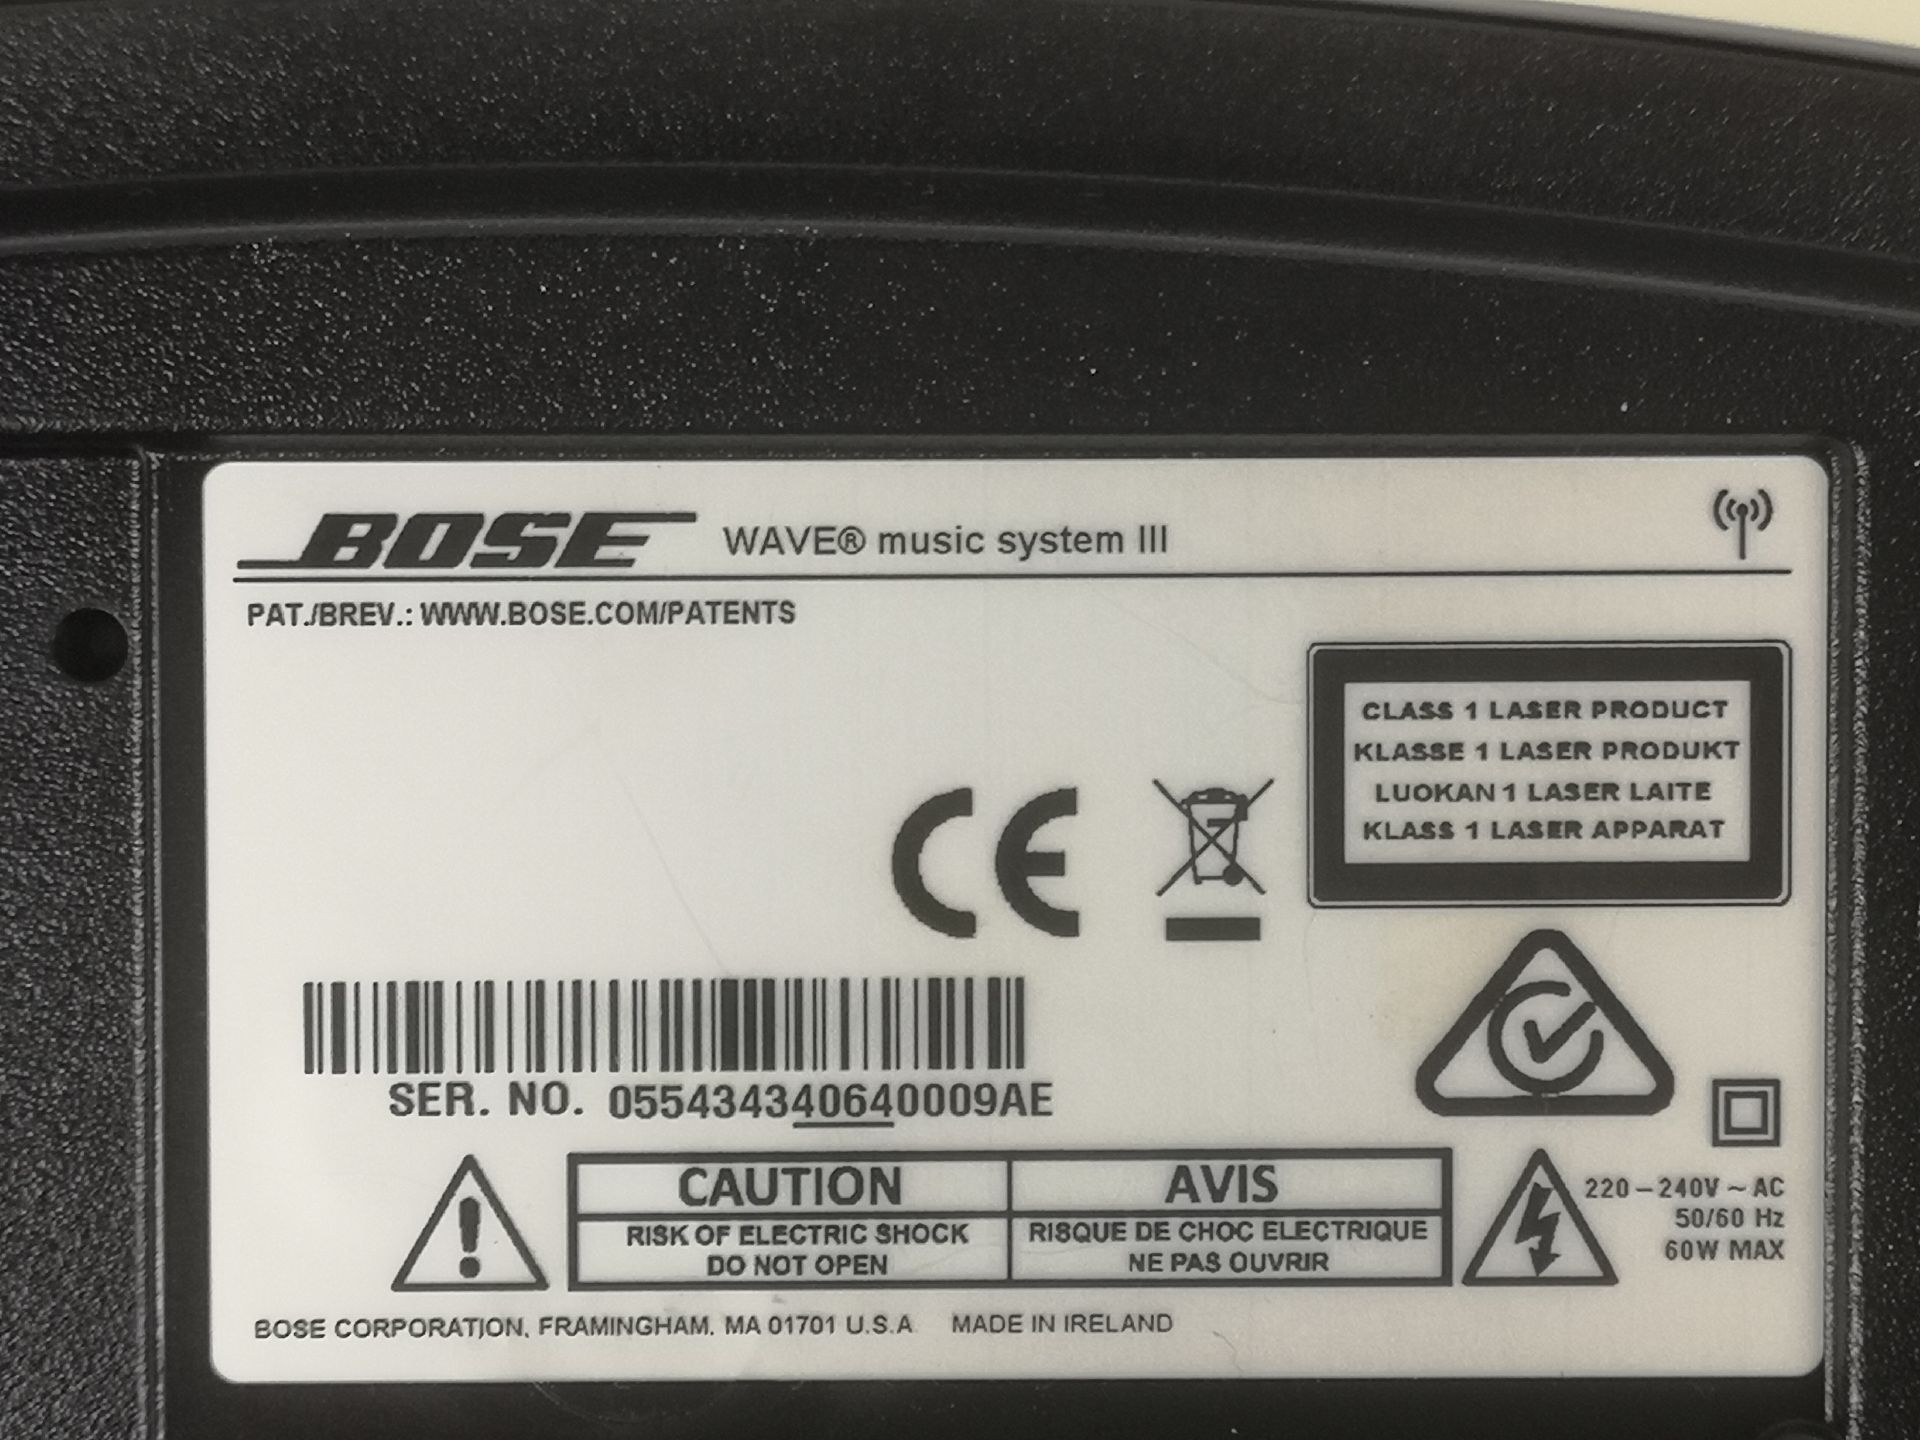 BOSE Wave music system III - Image 10 of 10